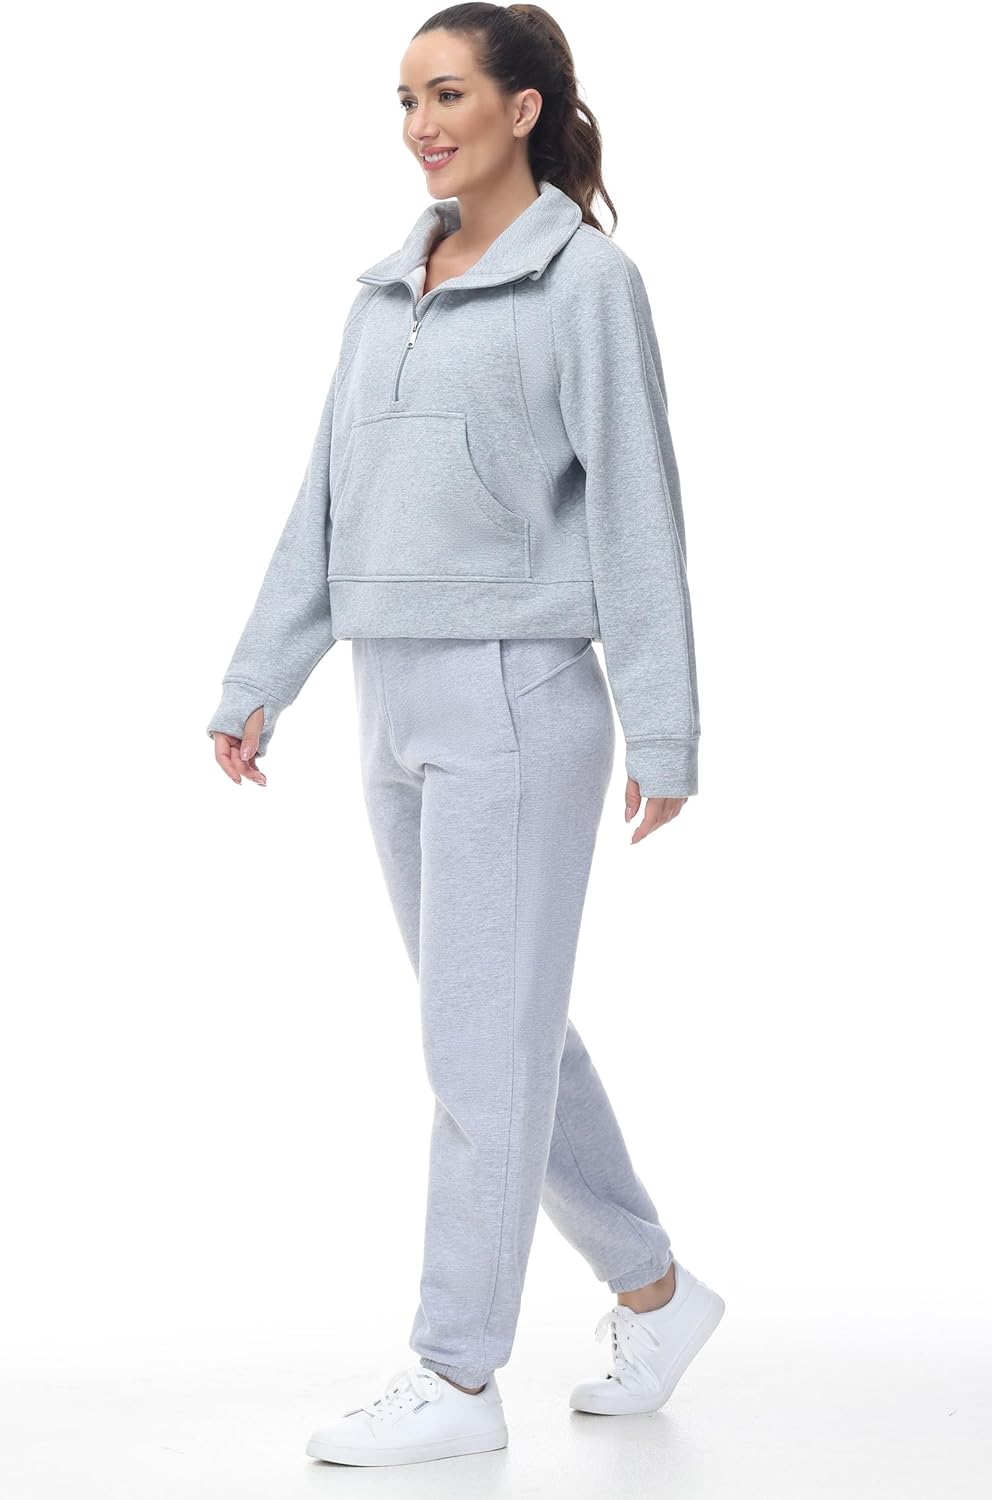 THE GYM PEOPLE Women's Fleece Sweatpants Warm Workout Joggers Pants with  Pockets(Grey) - The Gym People